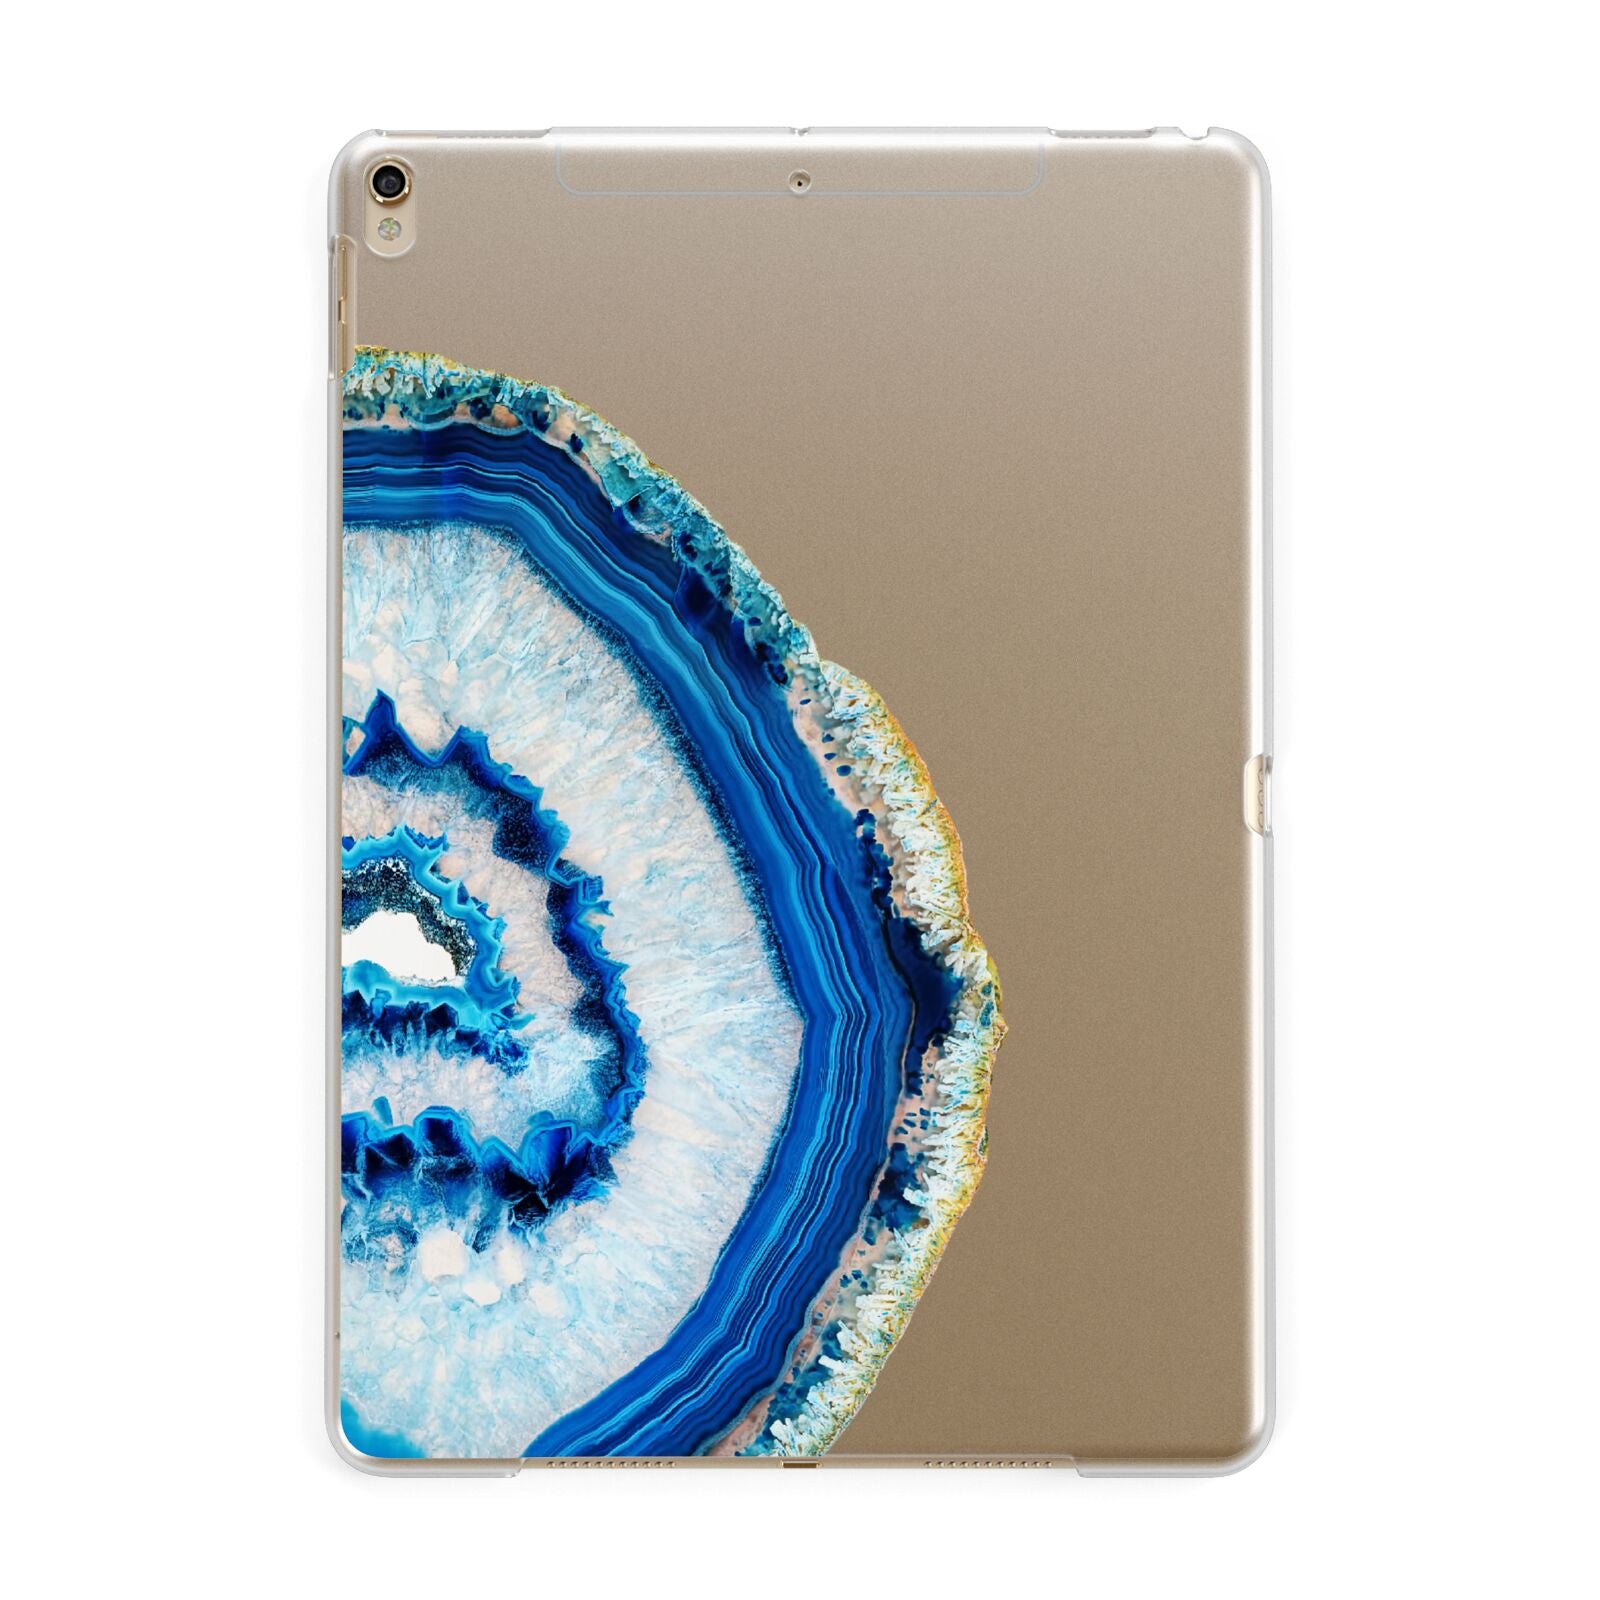 Agate Dark Blue and Turquoise Apple iPad Gold Case